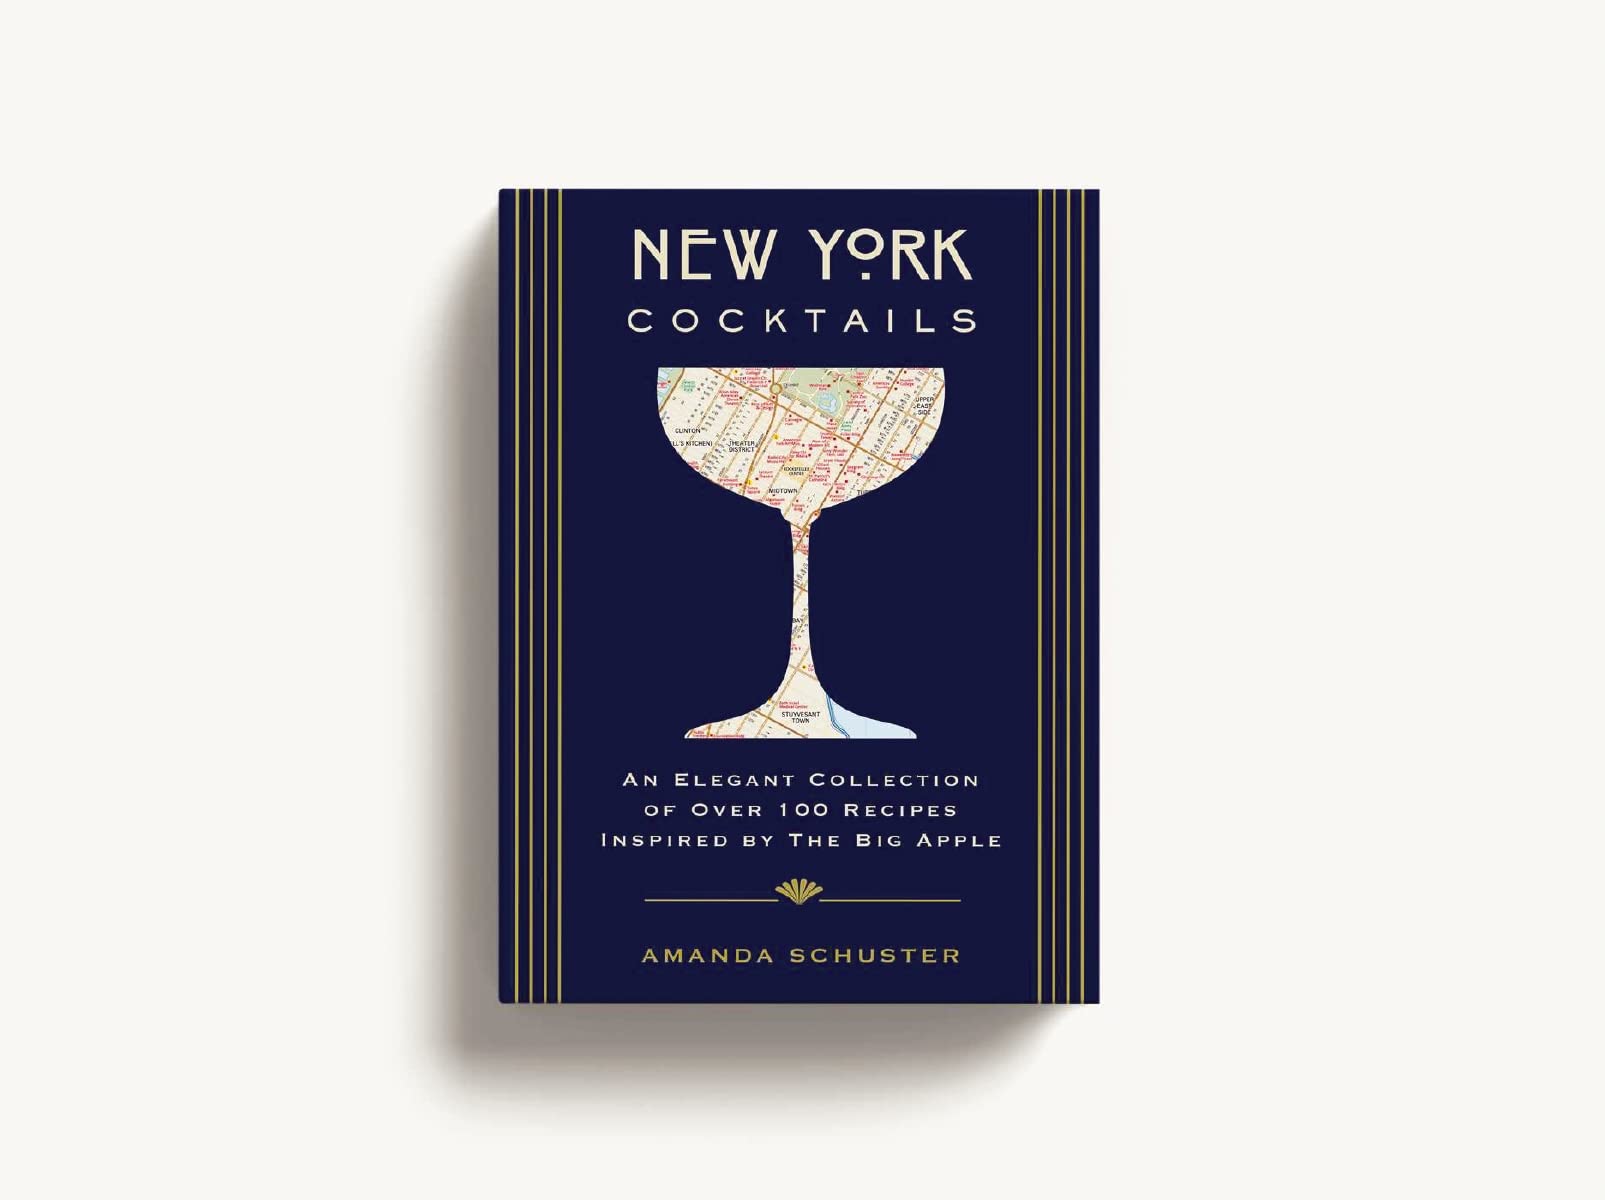 New York Cocktails: An Elegant Collection of over 100 Recipes Inspired by the Big Apple (Travel Cookbooks, NYC Cocktails and Drinks, History of Cocktails, Travel by Drink) (City Cocktails)